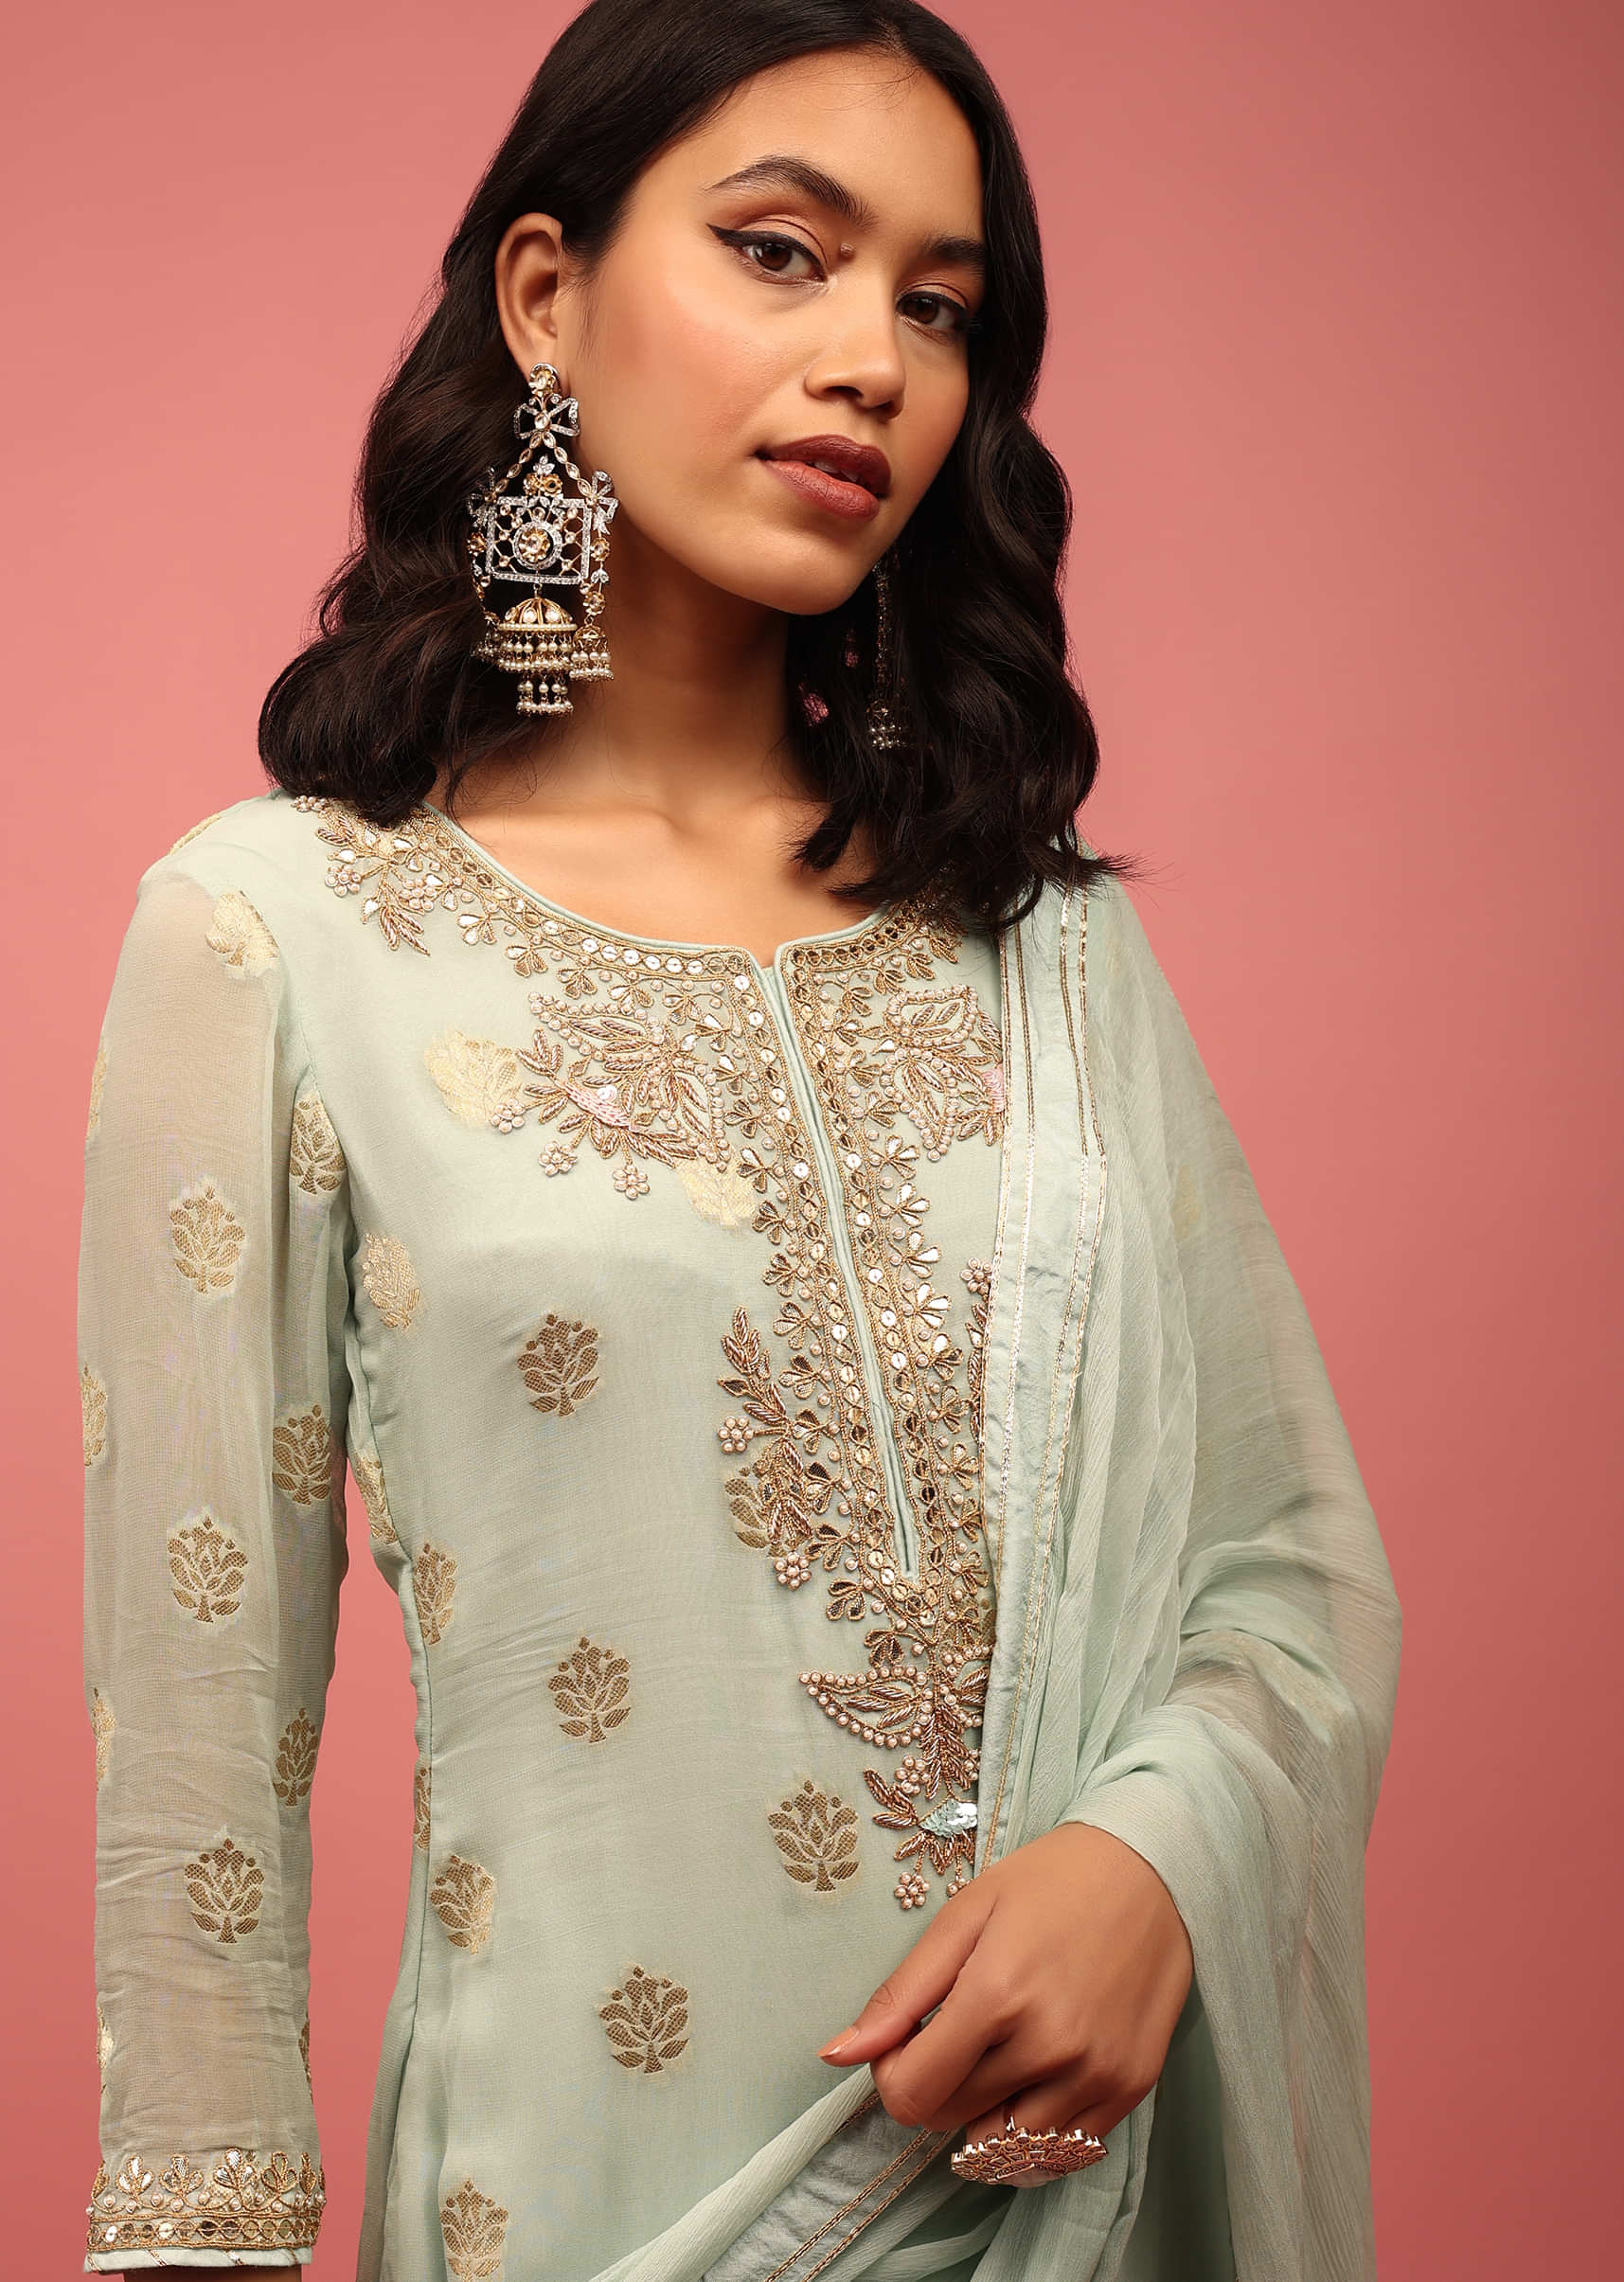 Light Green Palazzo Suit Set In Hand-Embellished Banarasi Georgette Crafted With Zardosi And Gotta Work